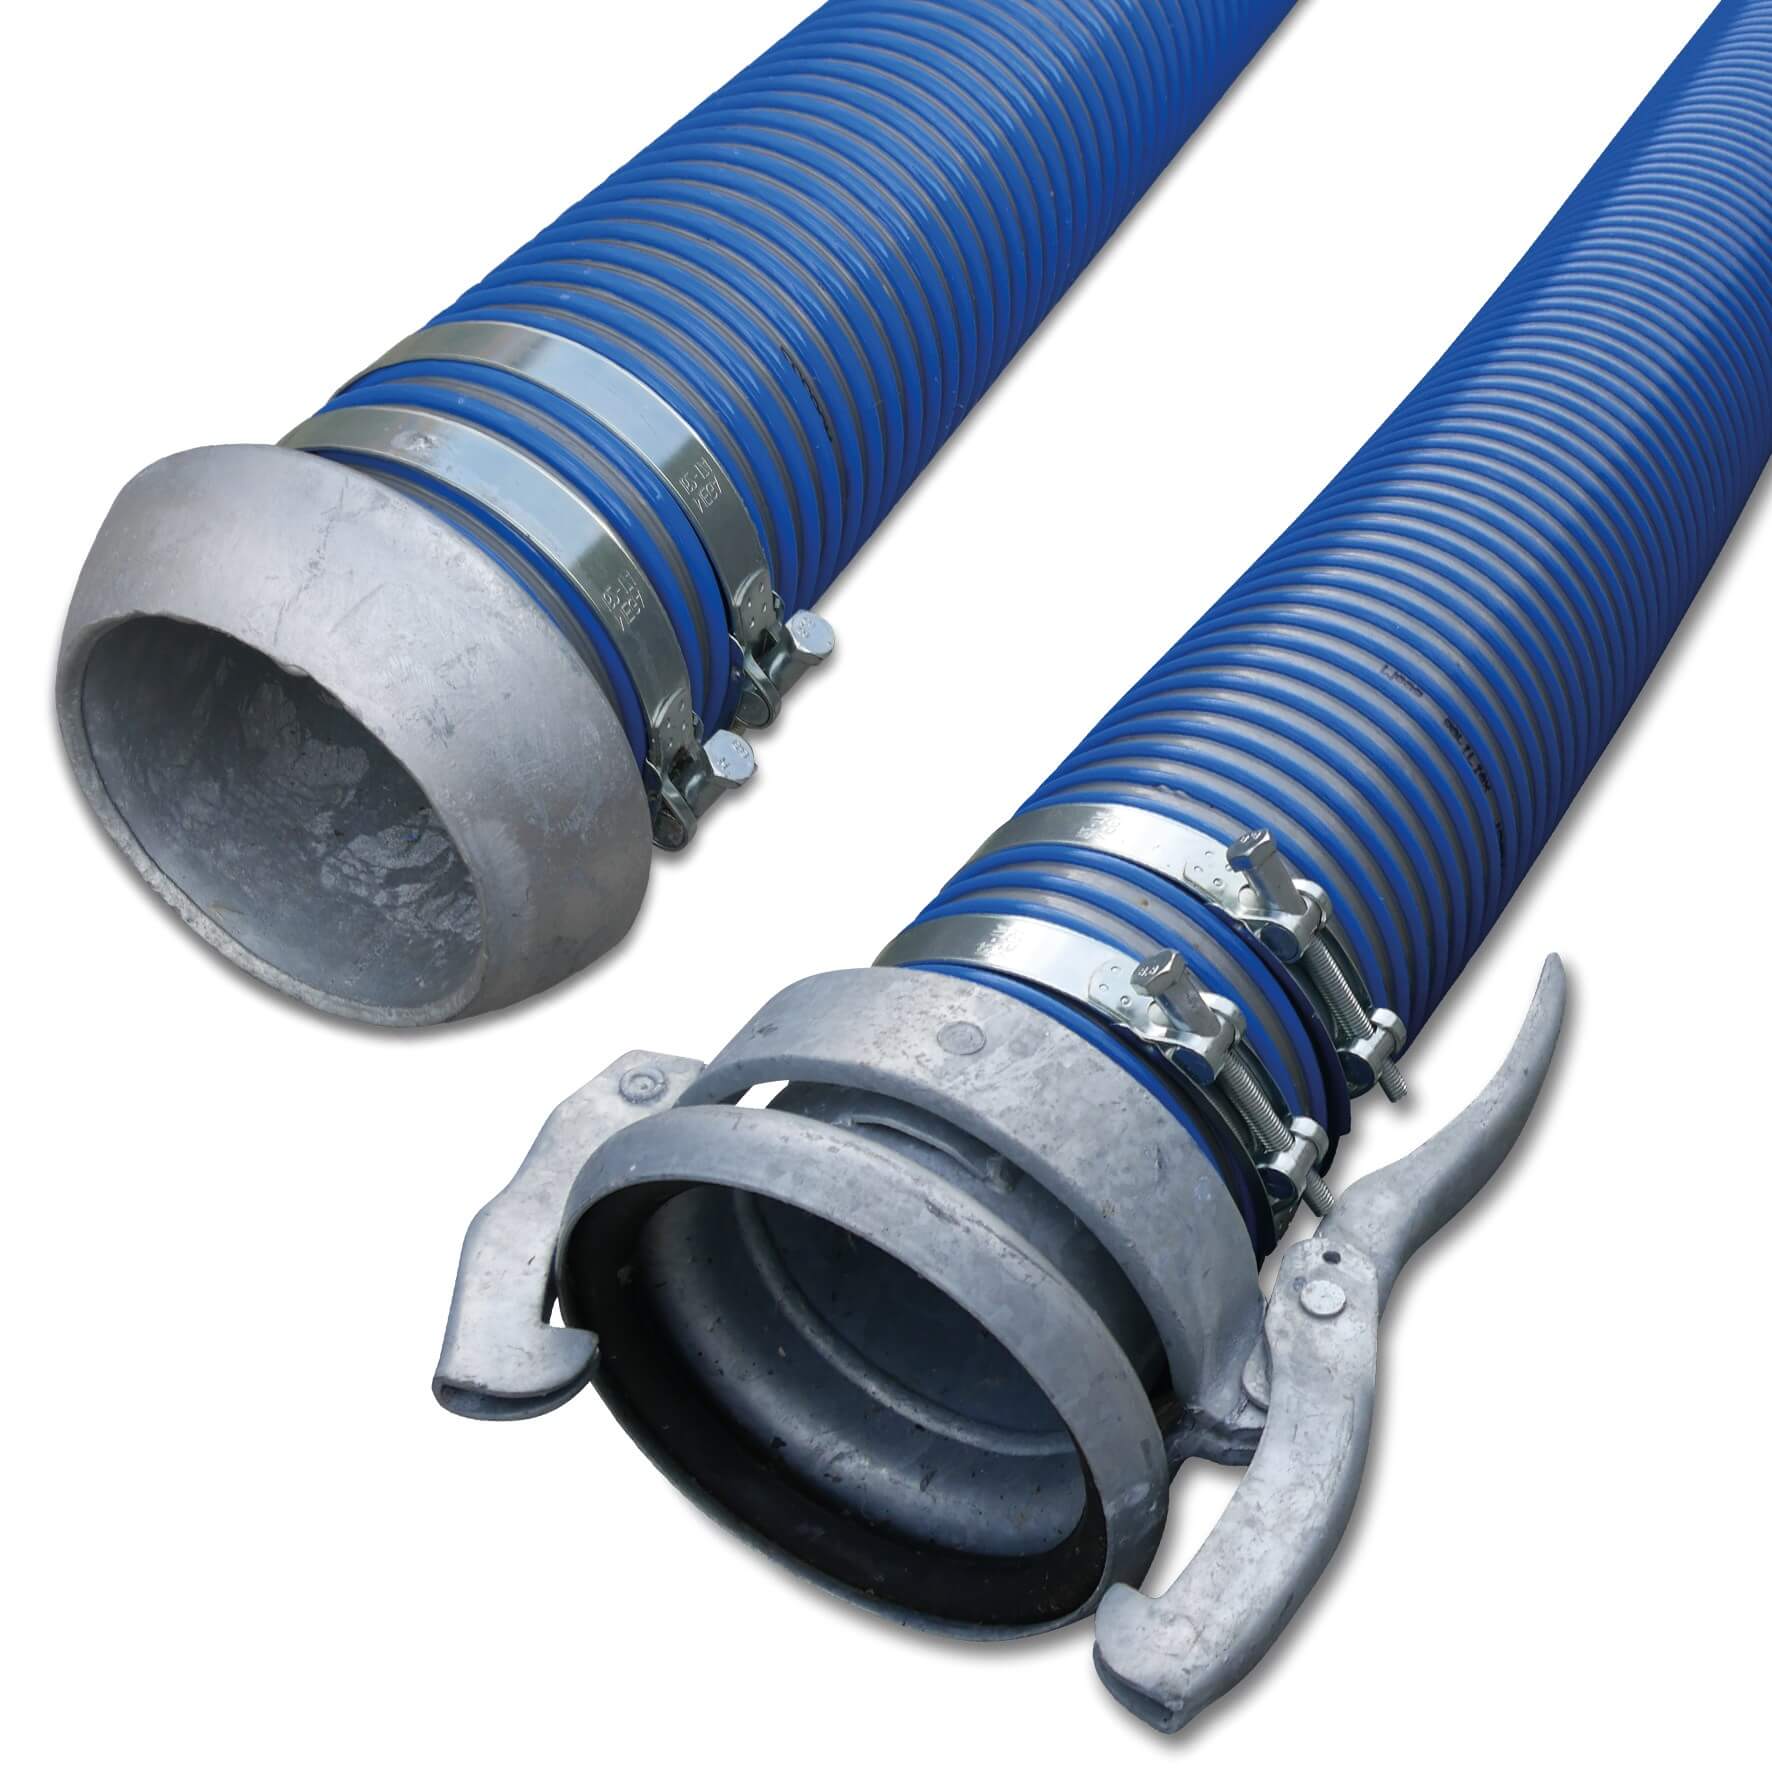 Spiral suction hose PVC 152 mm male part Perrot x female part Perrot 2bar blue/grey 4m type Agriflex